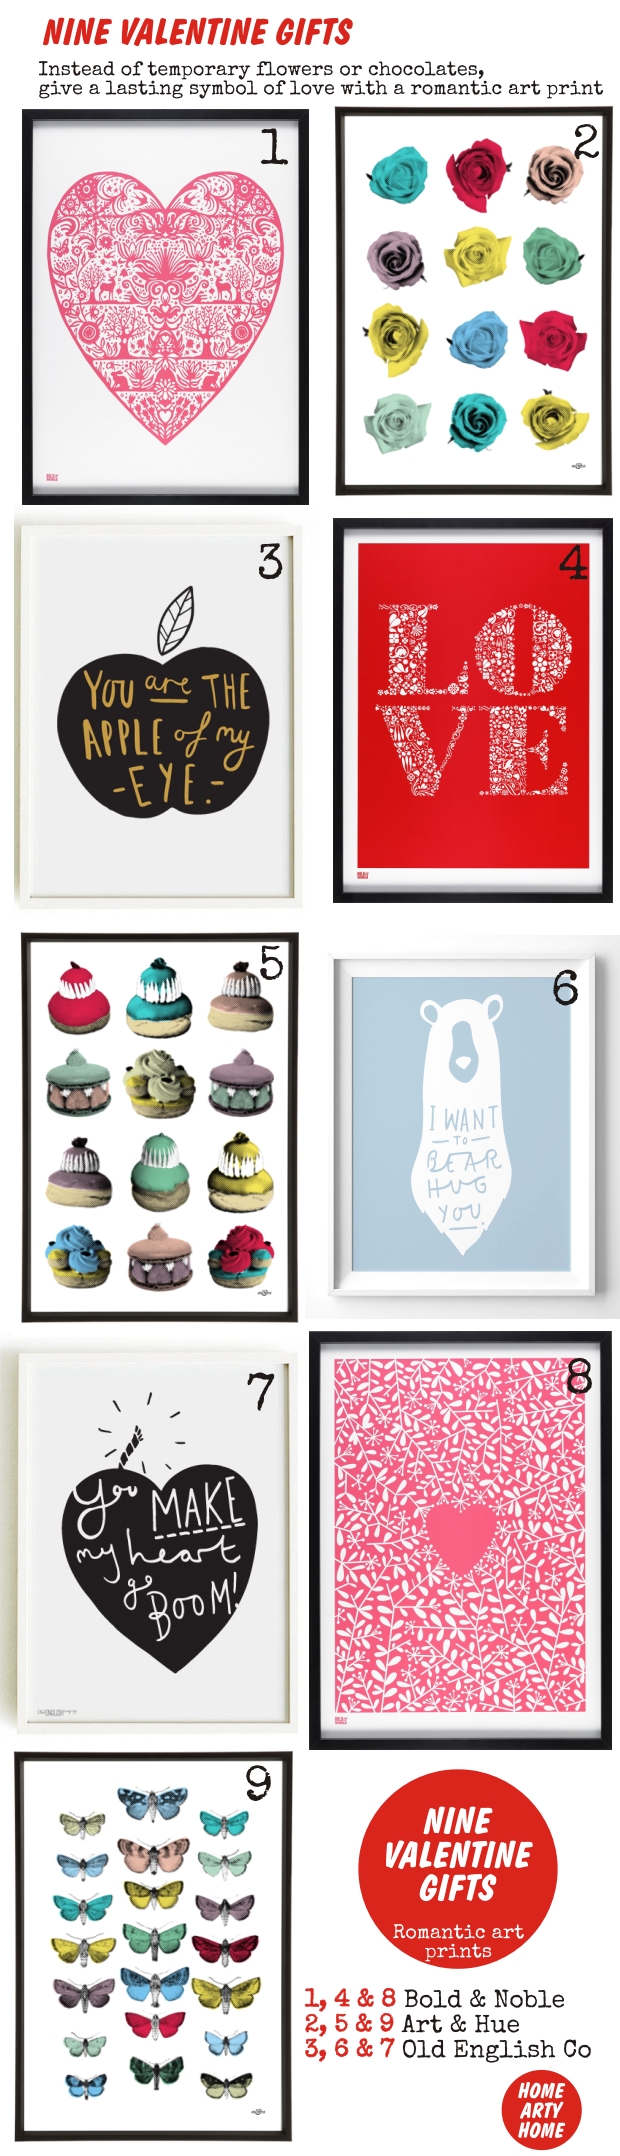 Nine Valentine Gifts homeartyhome